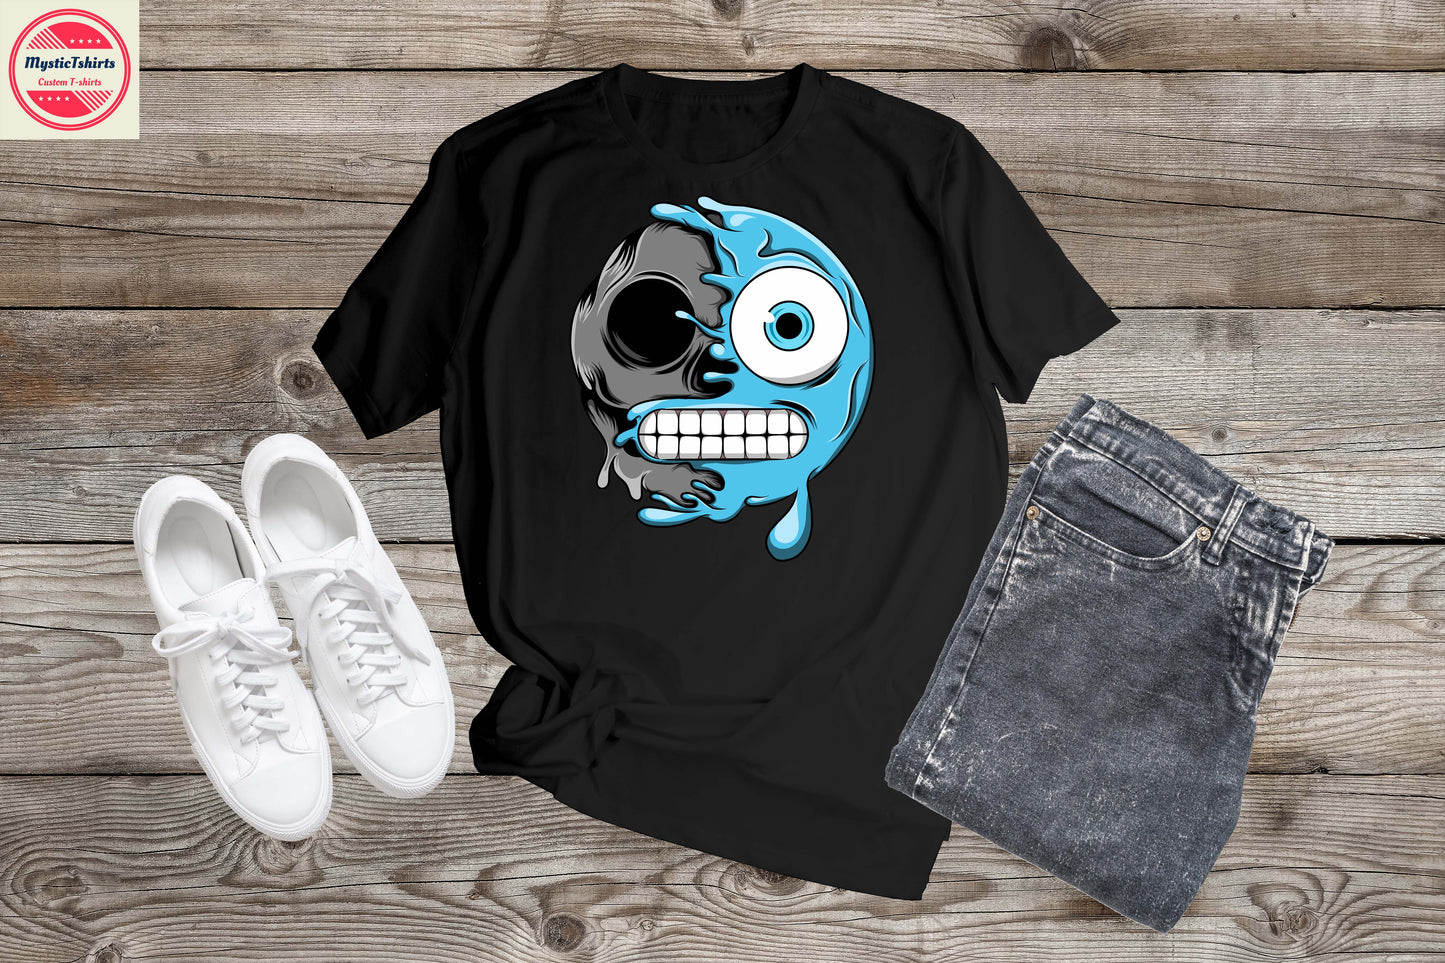 070. CRAZY FACE, Personalized T-Shirt, Custom Text, Make Your Own Shirt, Custom Tee